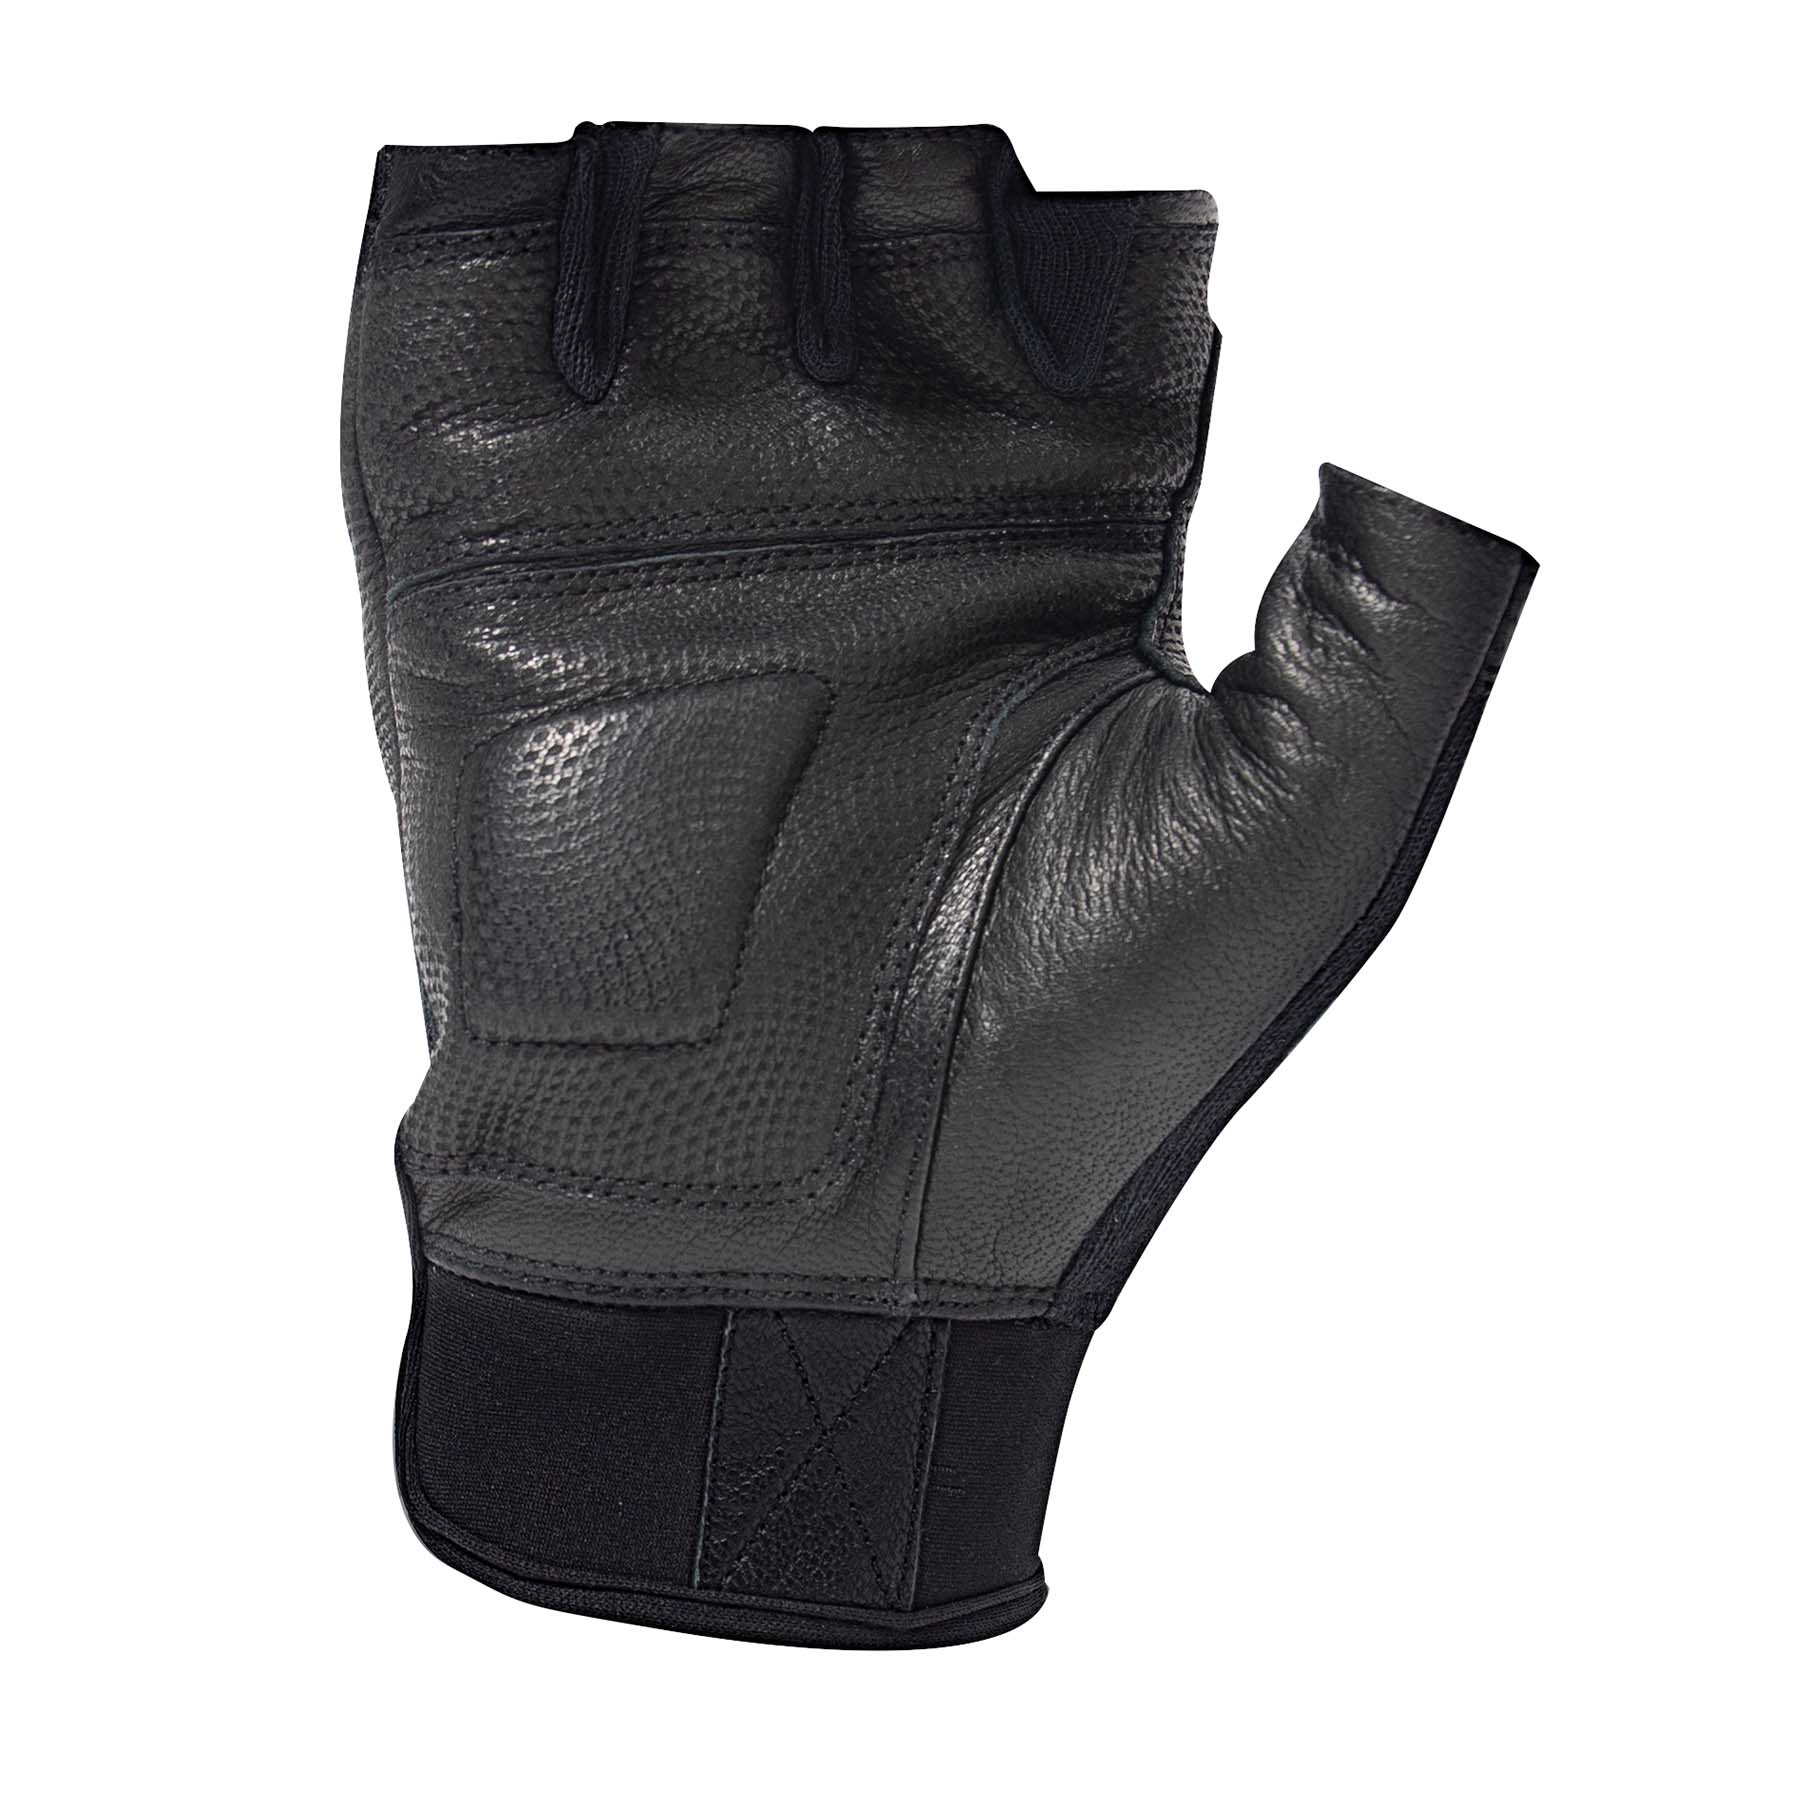 Cut Resistant Gloves - Rothco Fingerless Cut Resistant Carbon Hard Knuckle Gloves